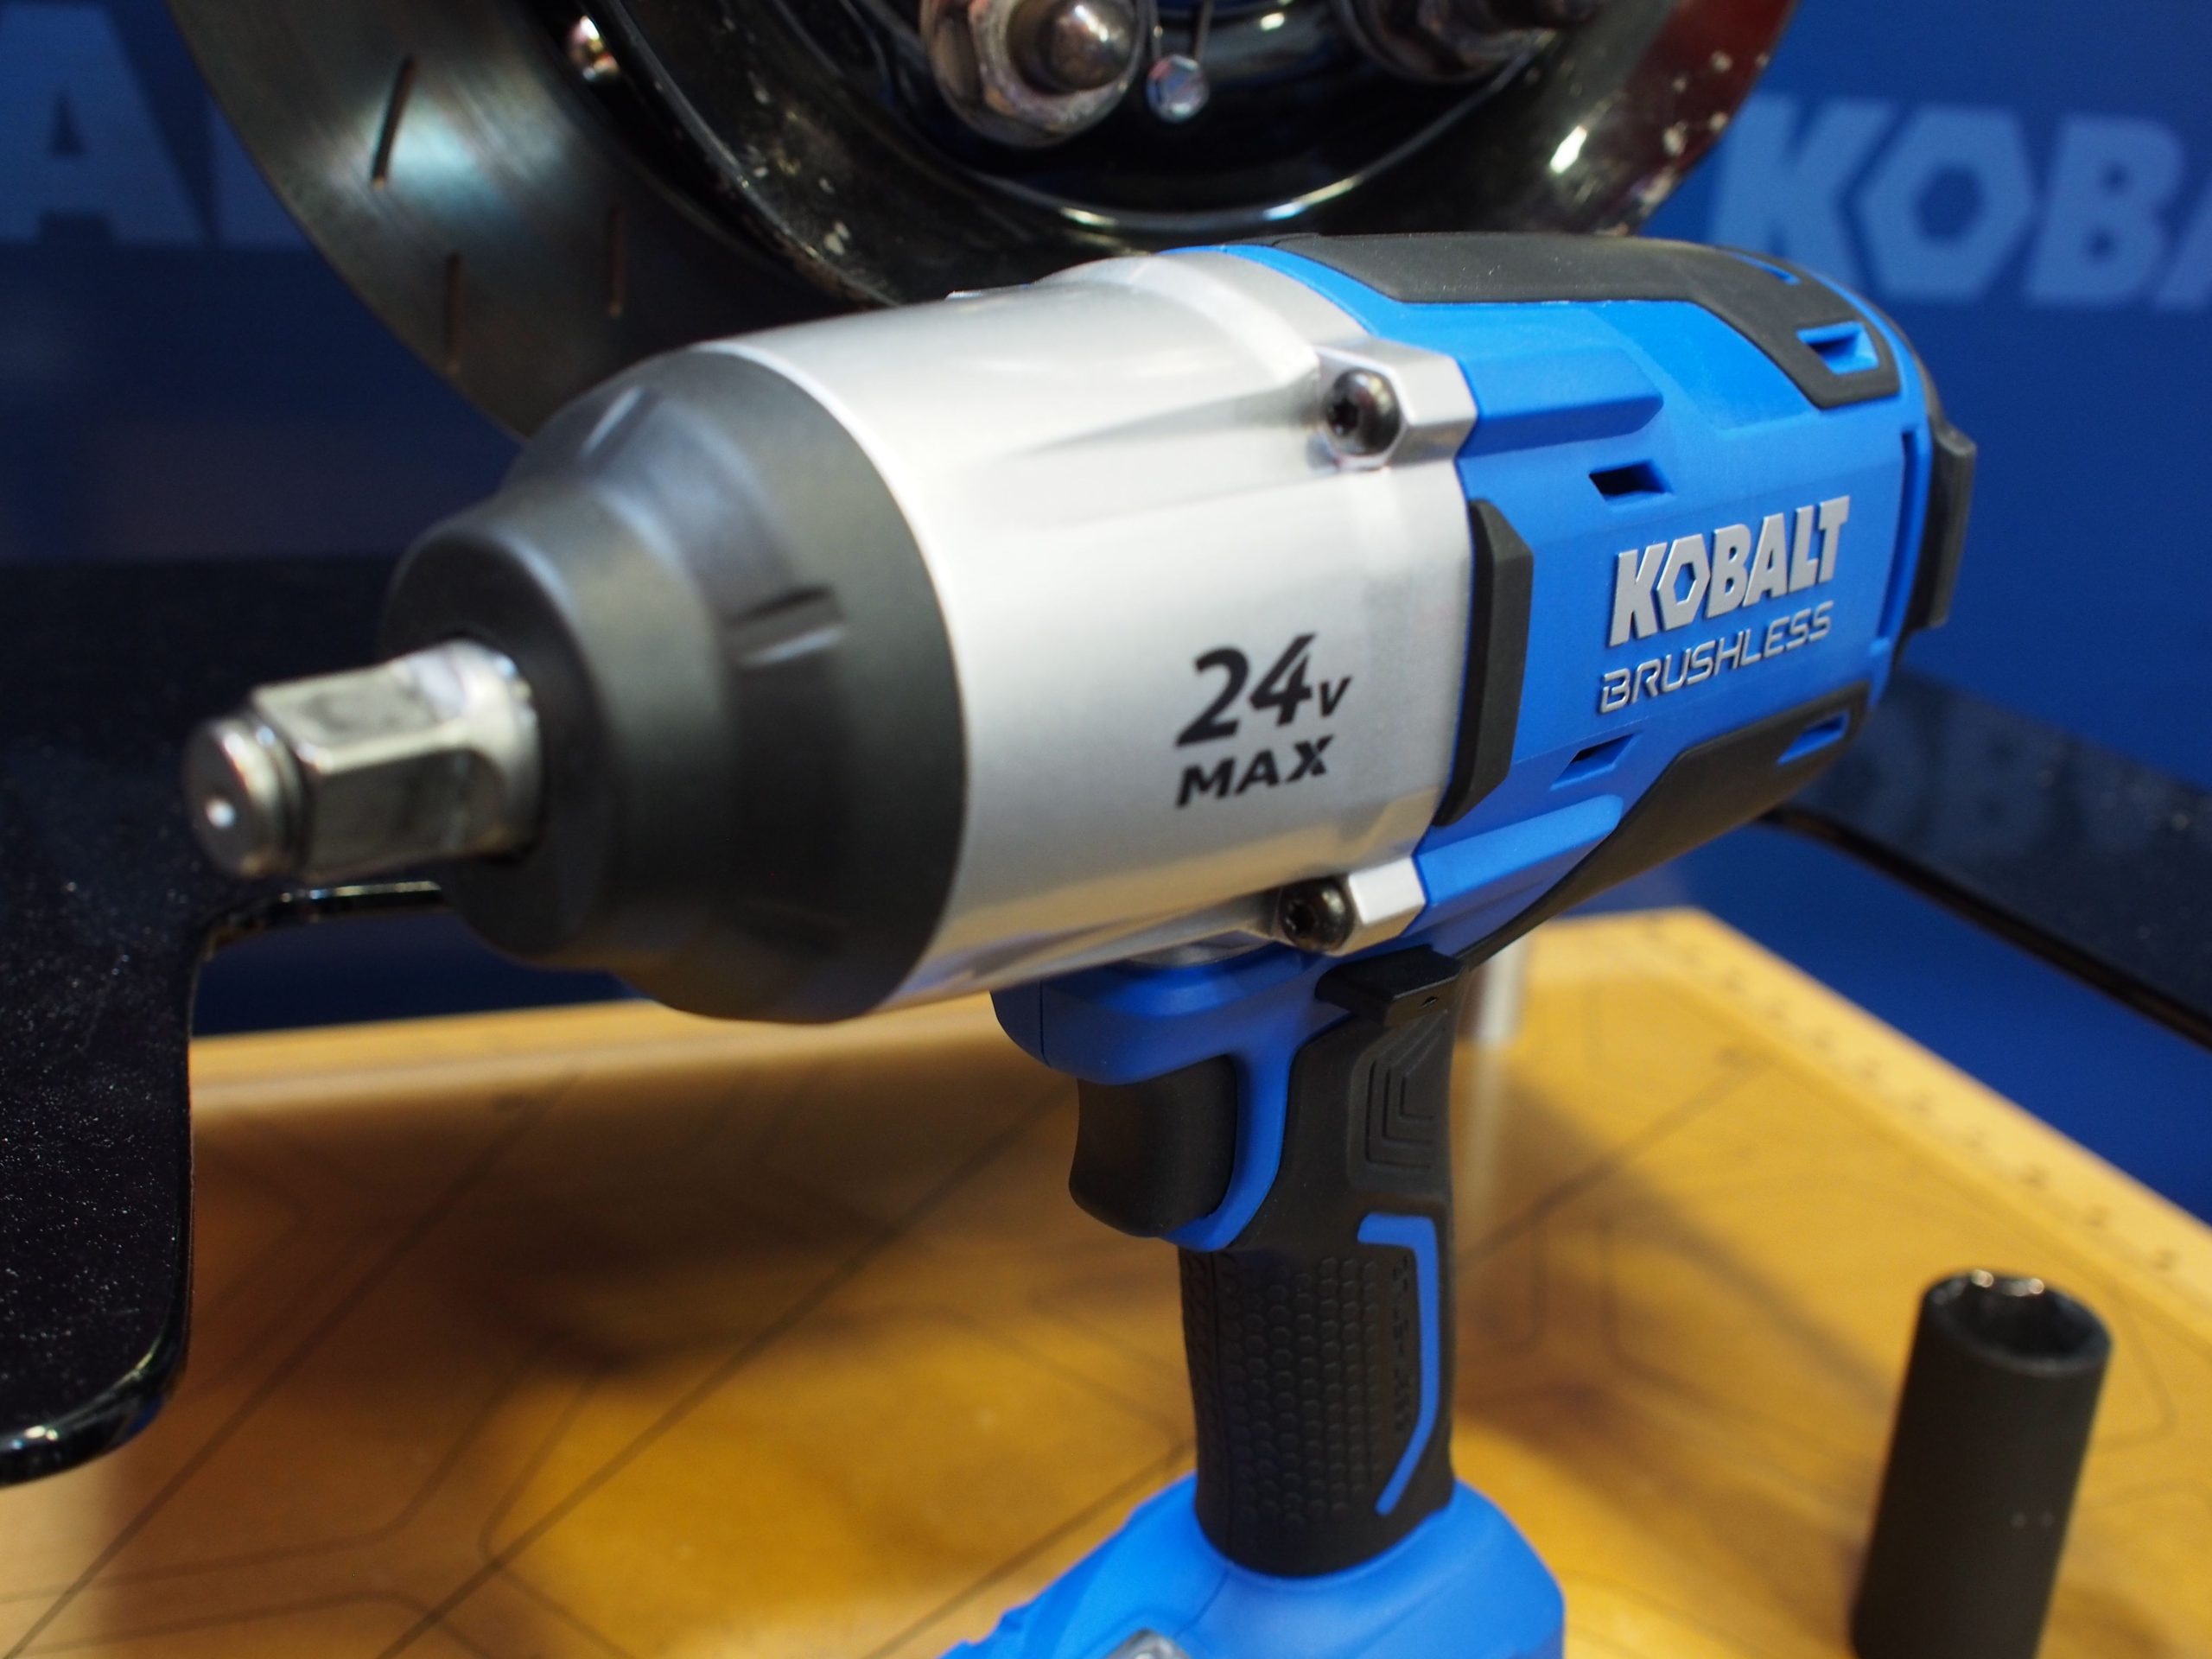 6 Easy Steps On How To Make Impact Wrench More Powerful